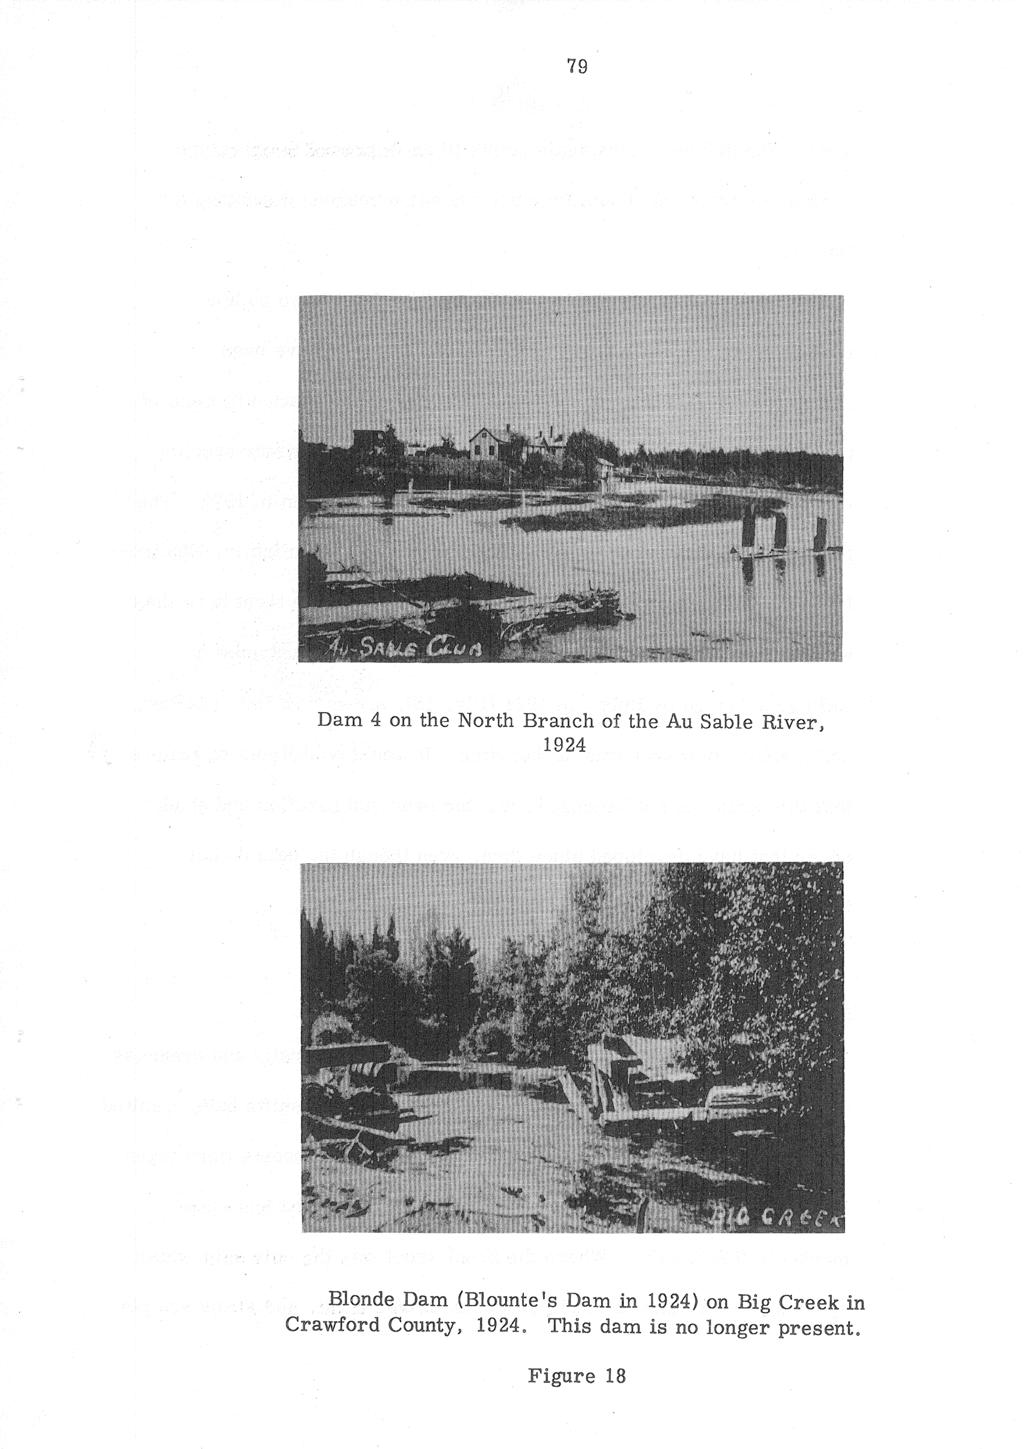 Dam 4 on the North Branch of the Au Sable River, 1924 Blonde Dam (Blountels Darn% in